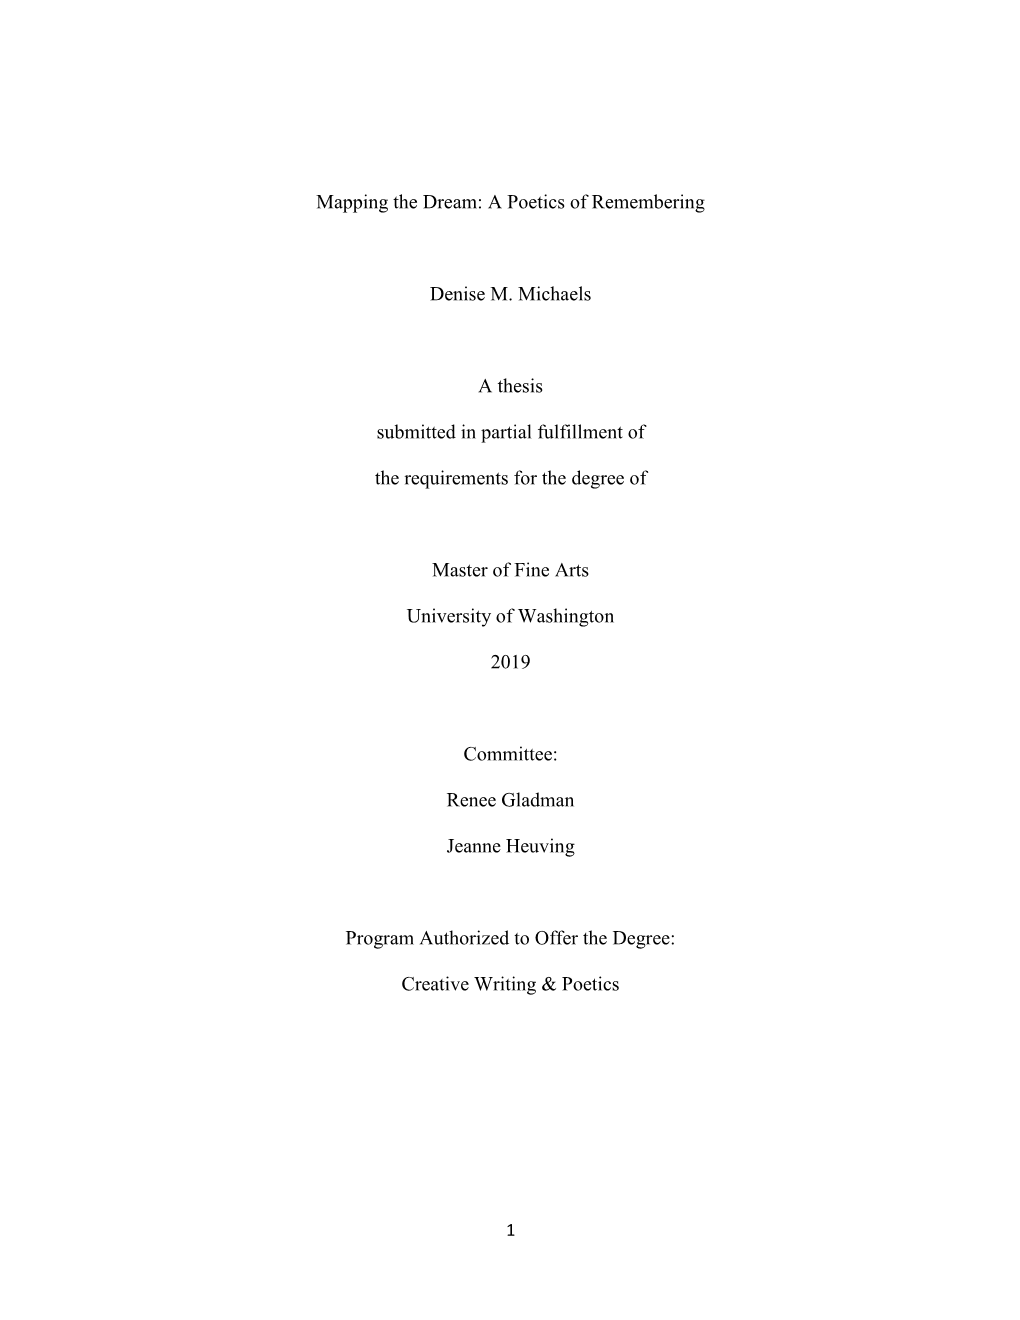 Mapping the Dream: a Poetics of Remembering Denise M. Michaels a Thesis Submitted in Partial Fulfillment of the Requirements